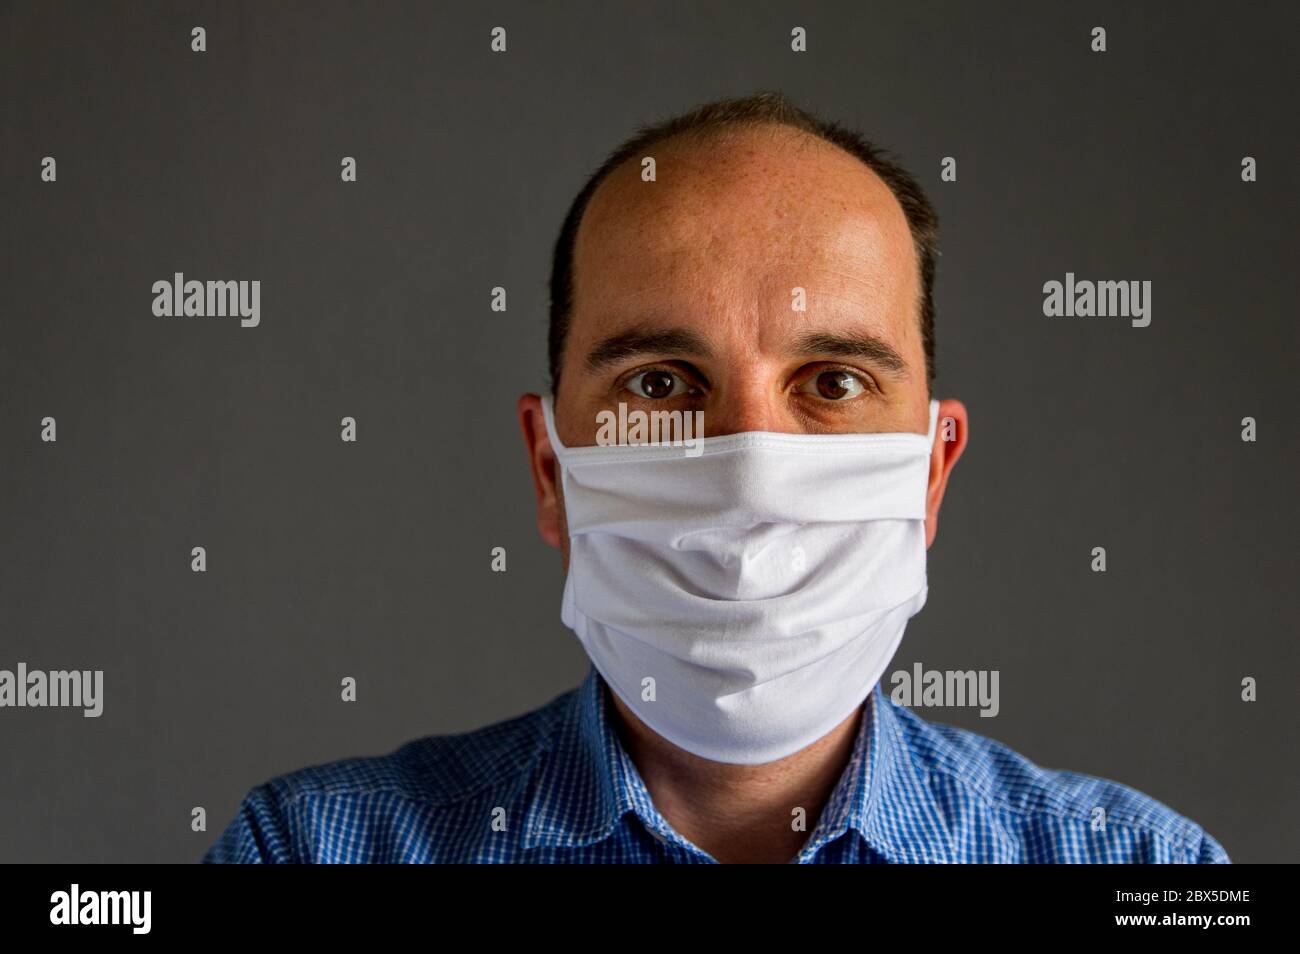 portrait of a young caucasian man wearing a protective face mask in front of a gray background. Studio shot with natural light. Stock Photo